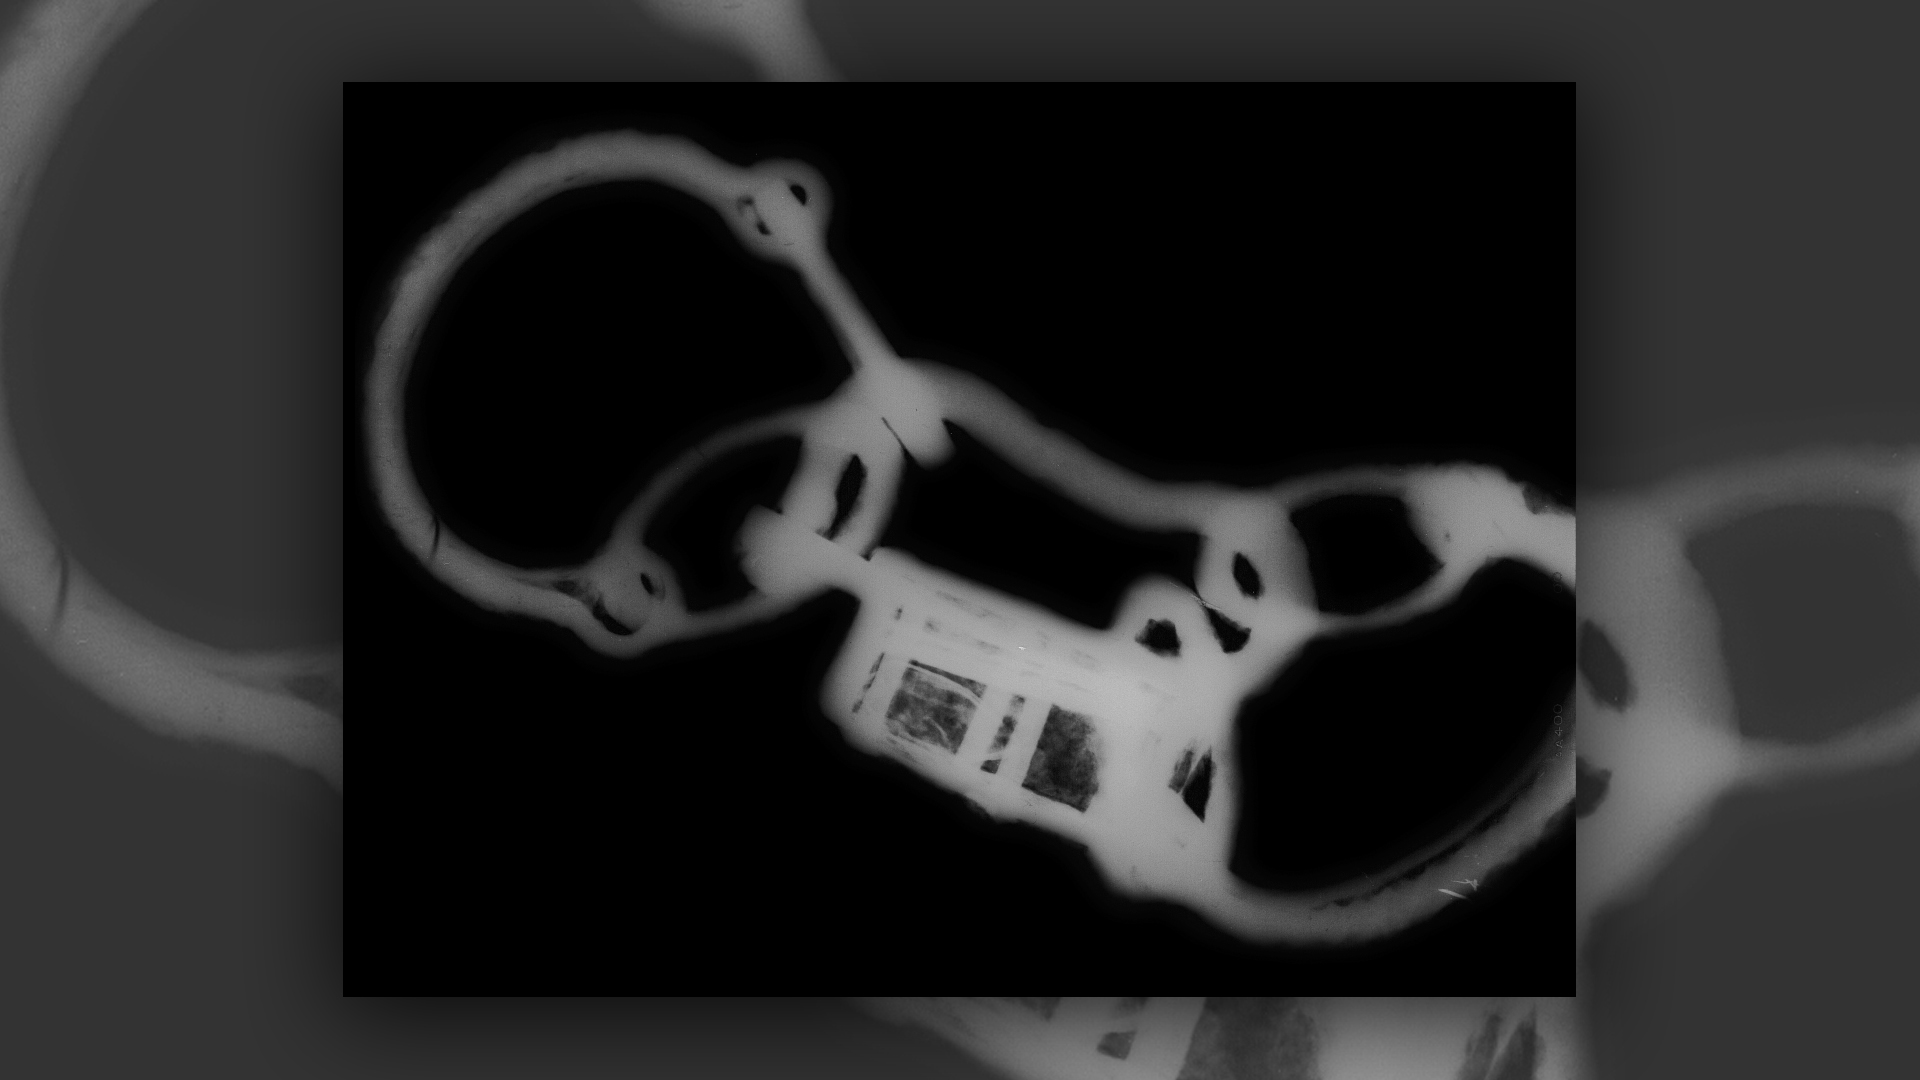 An X-ray of the Great Casterton shackles and padlock.